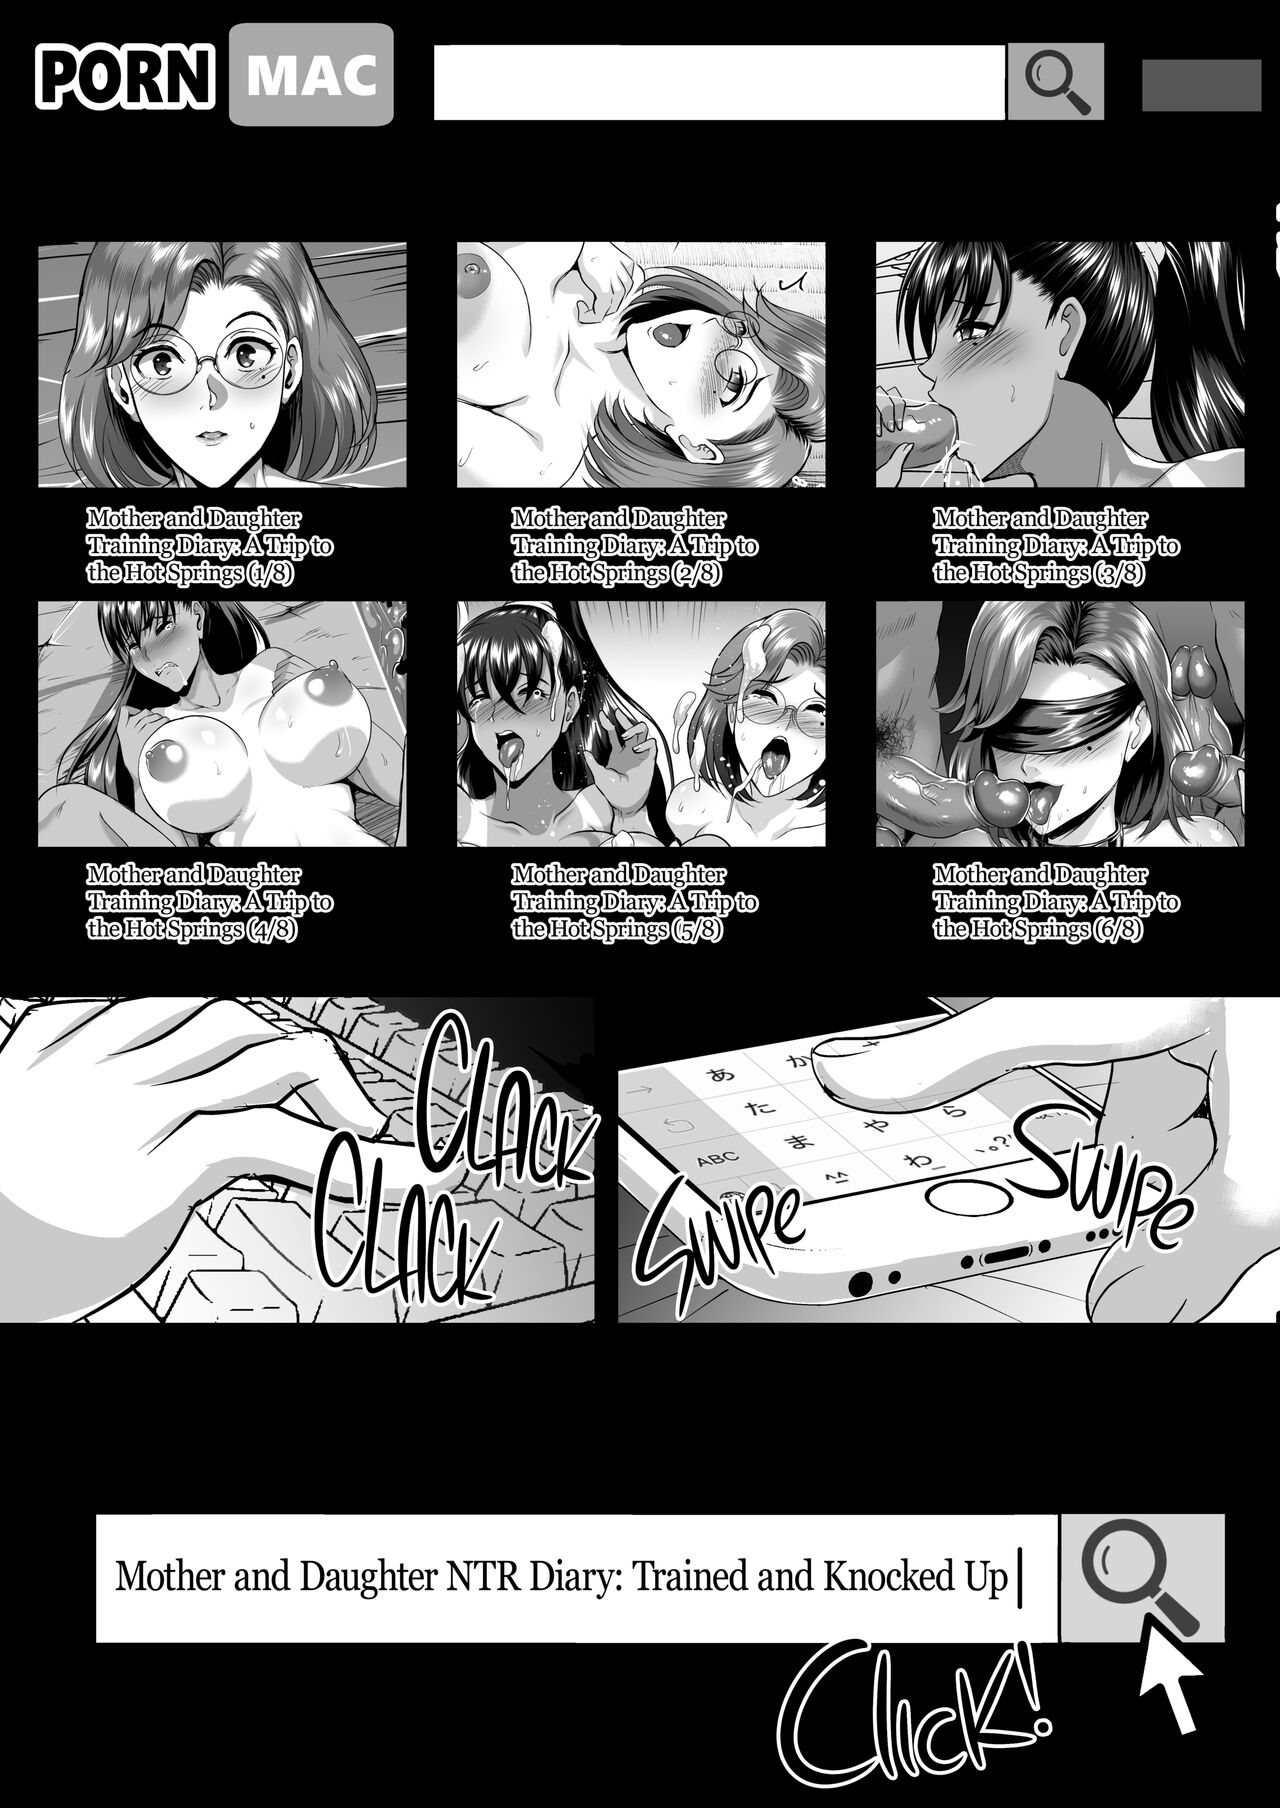 1280px x 1808px - Mother and Daughter NTR Diary 2; Trained and Knocked Up Page 2 - AsmHentai